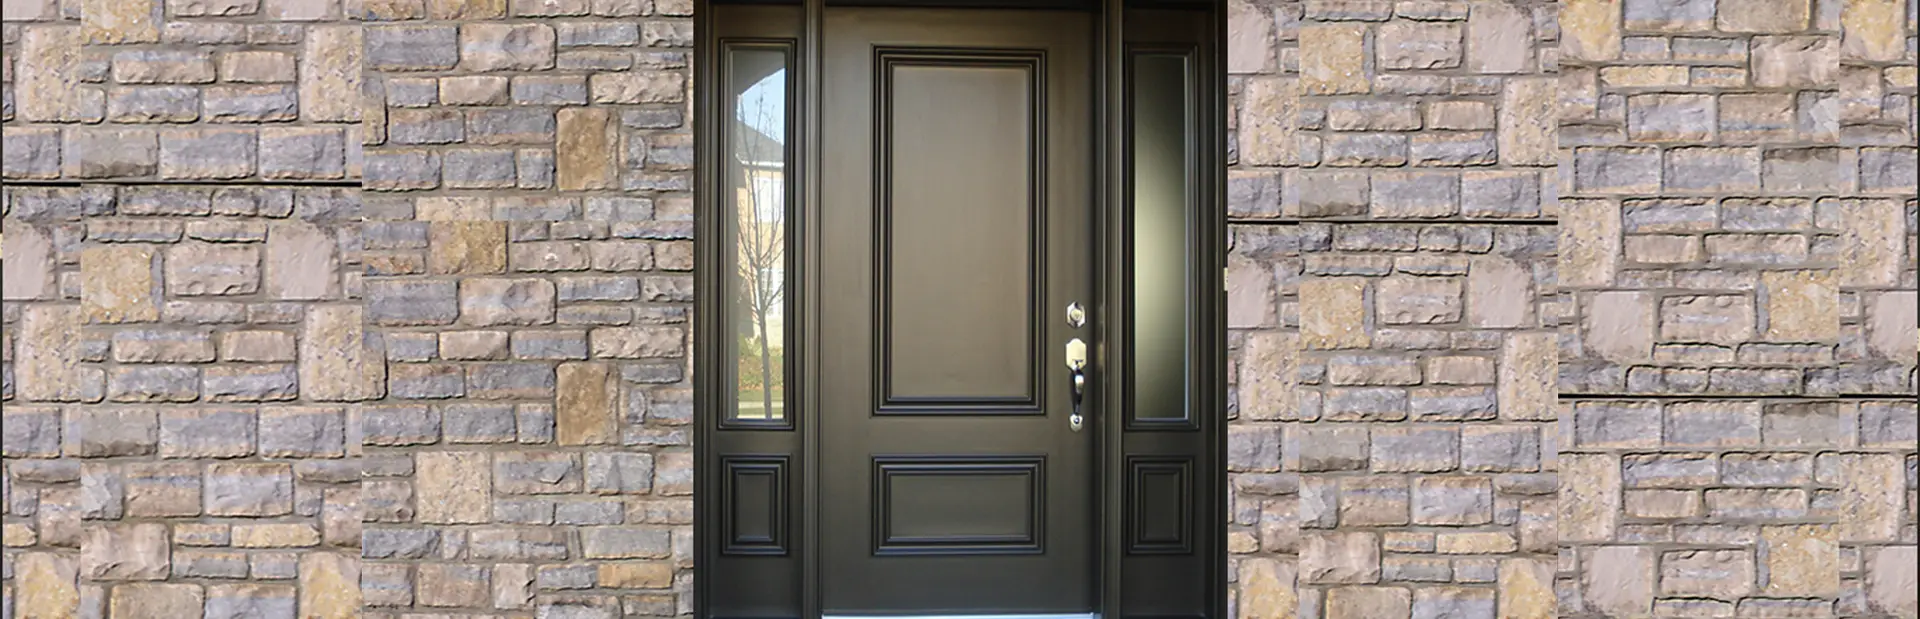 Door Replacement And Installation Services